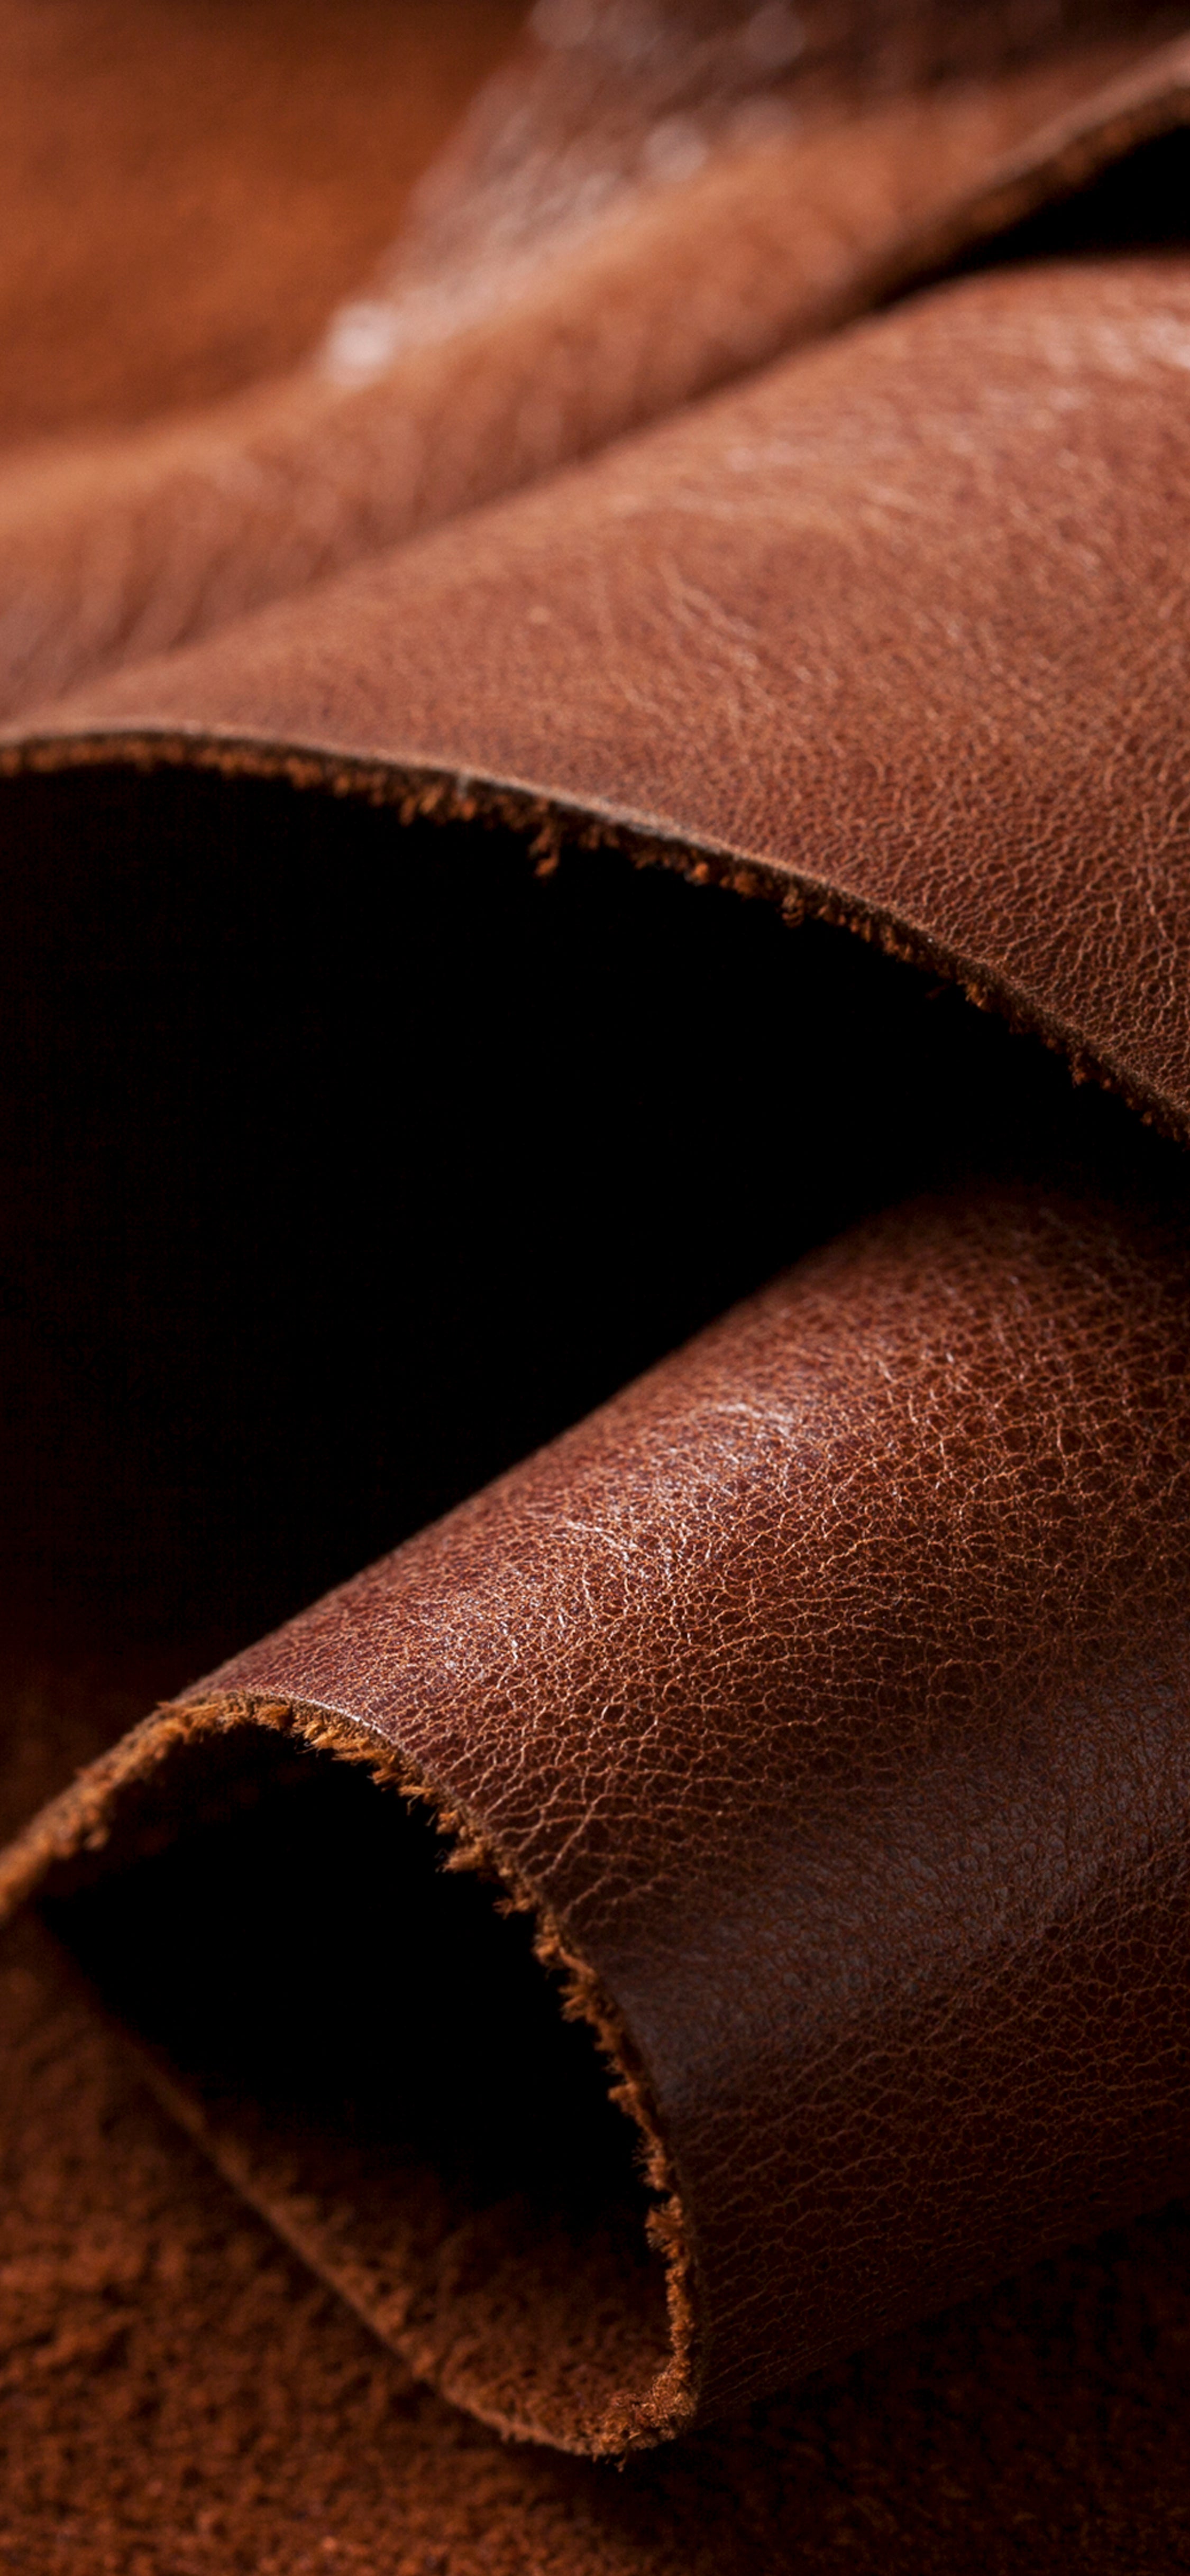 Leather Texture iPhone Wallpaper HD  iPhone Wallpapers